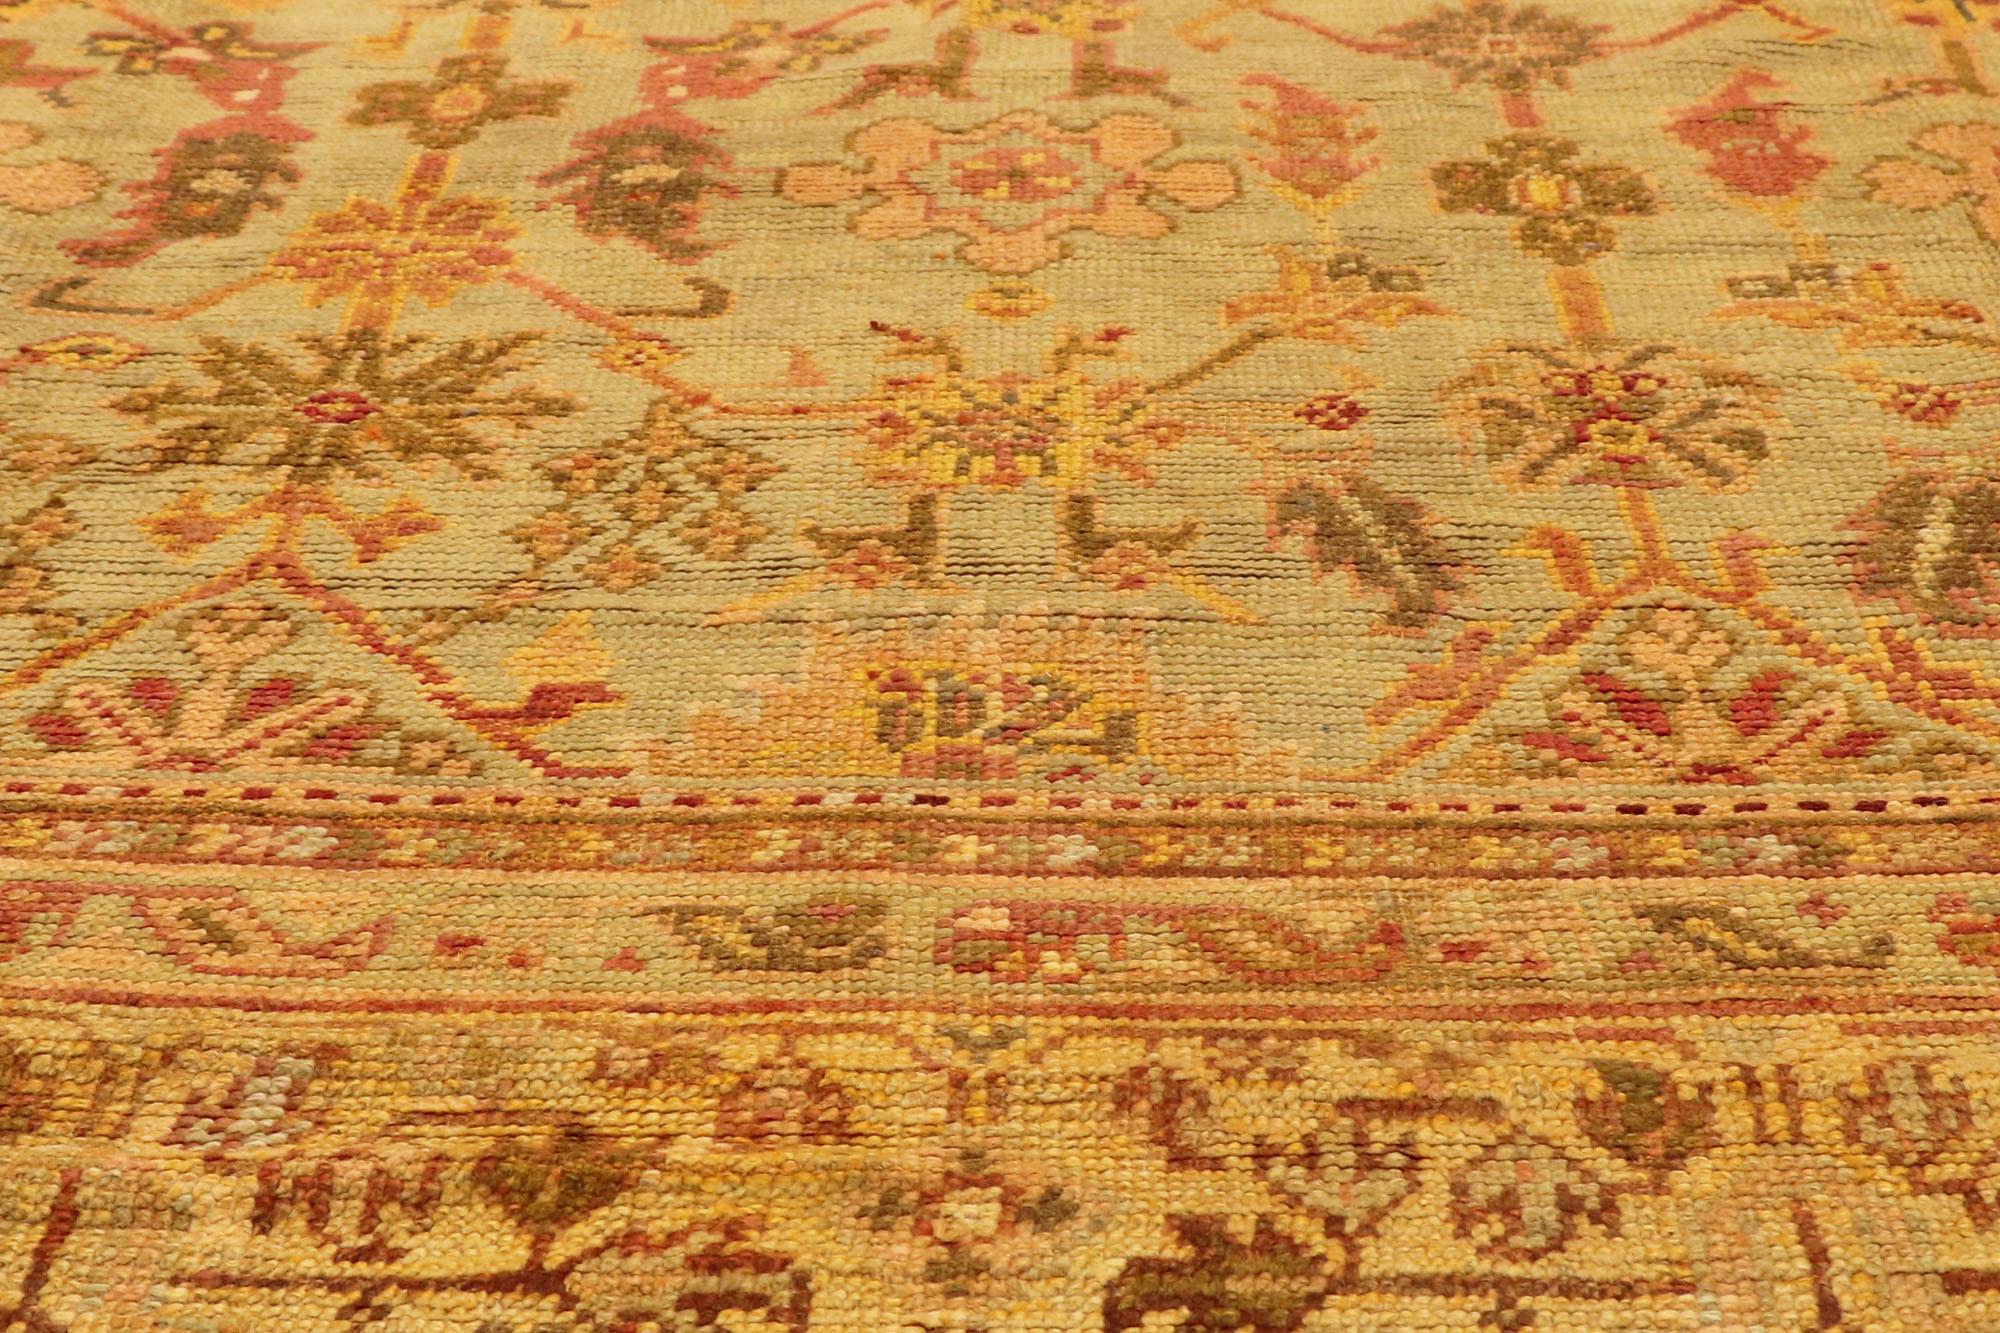 Antique Turkish Oushak Rug, Italian Nonna Chic Meets Electic Elegance In Good Condition For Sale In Dallas, TX